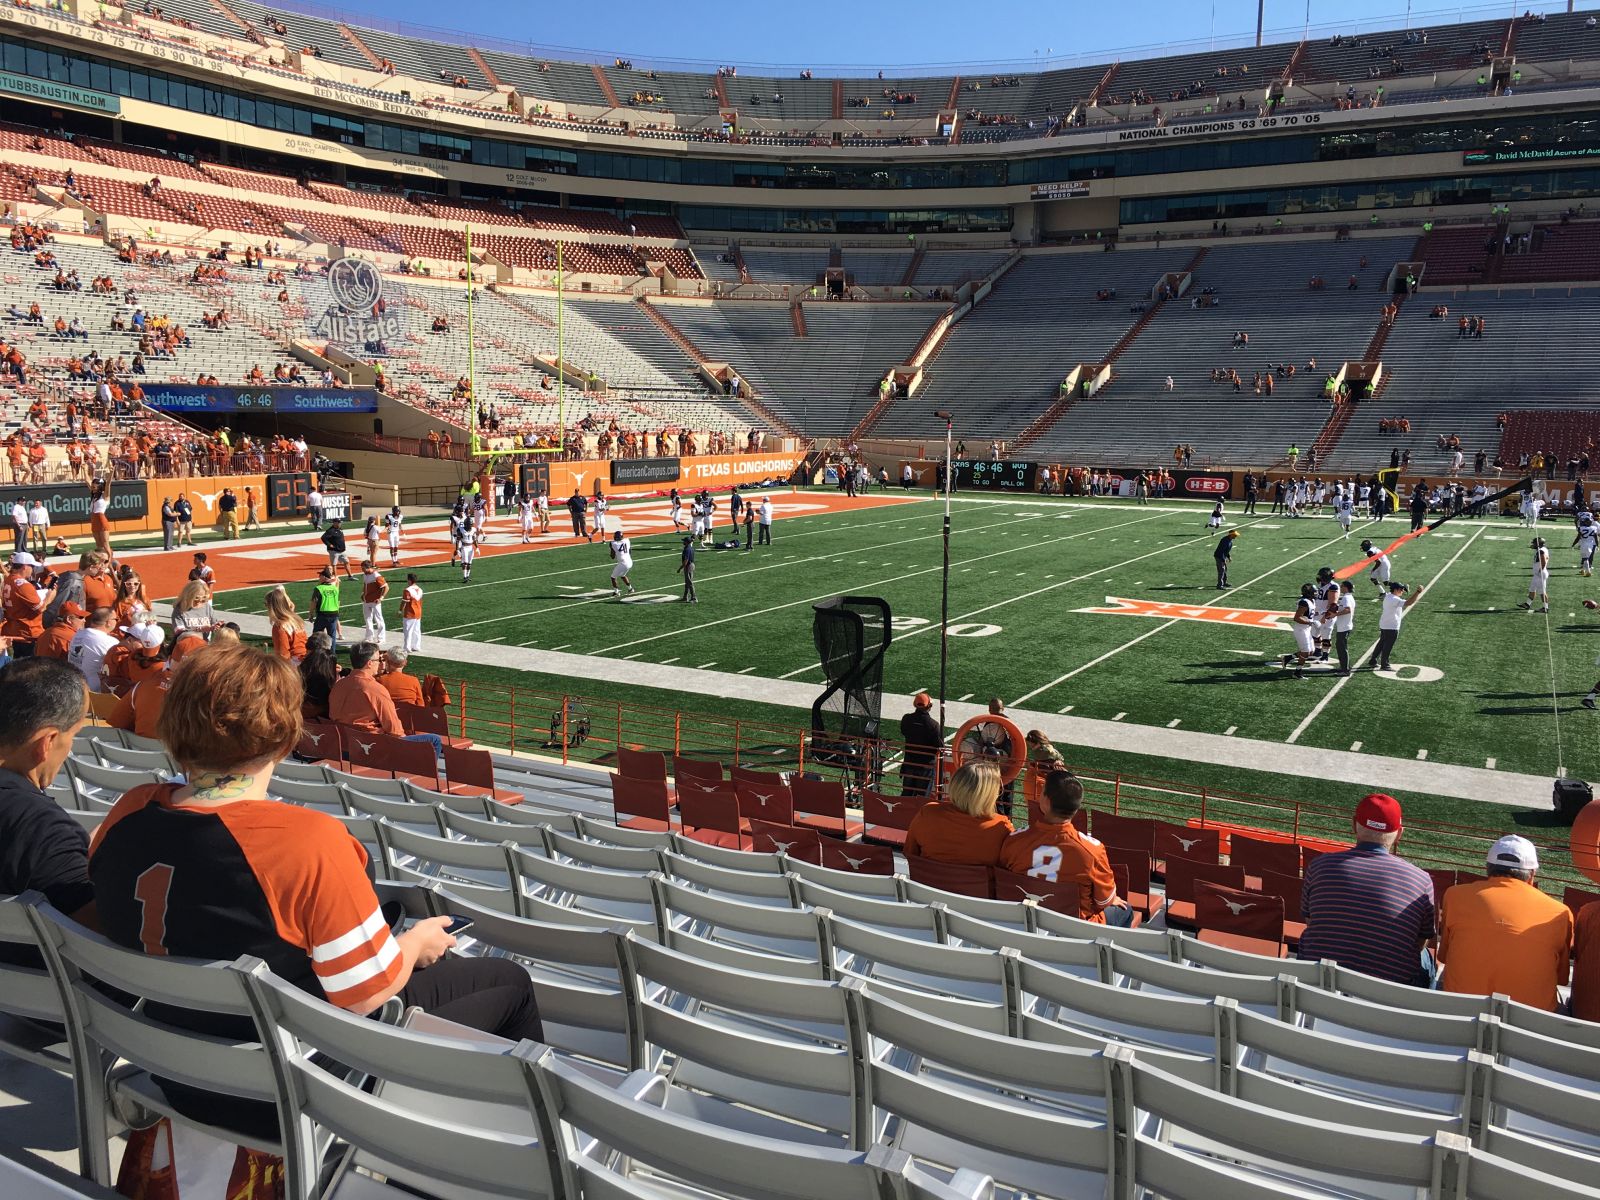 section 5, row 12 seat view  - dkr-texas memorial stadium